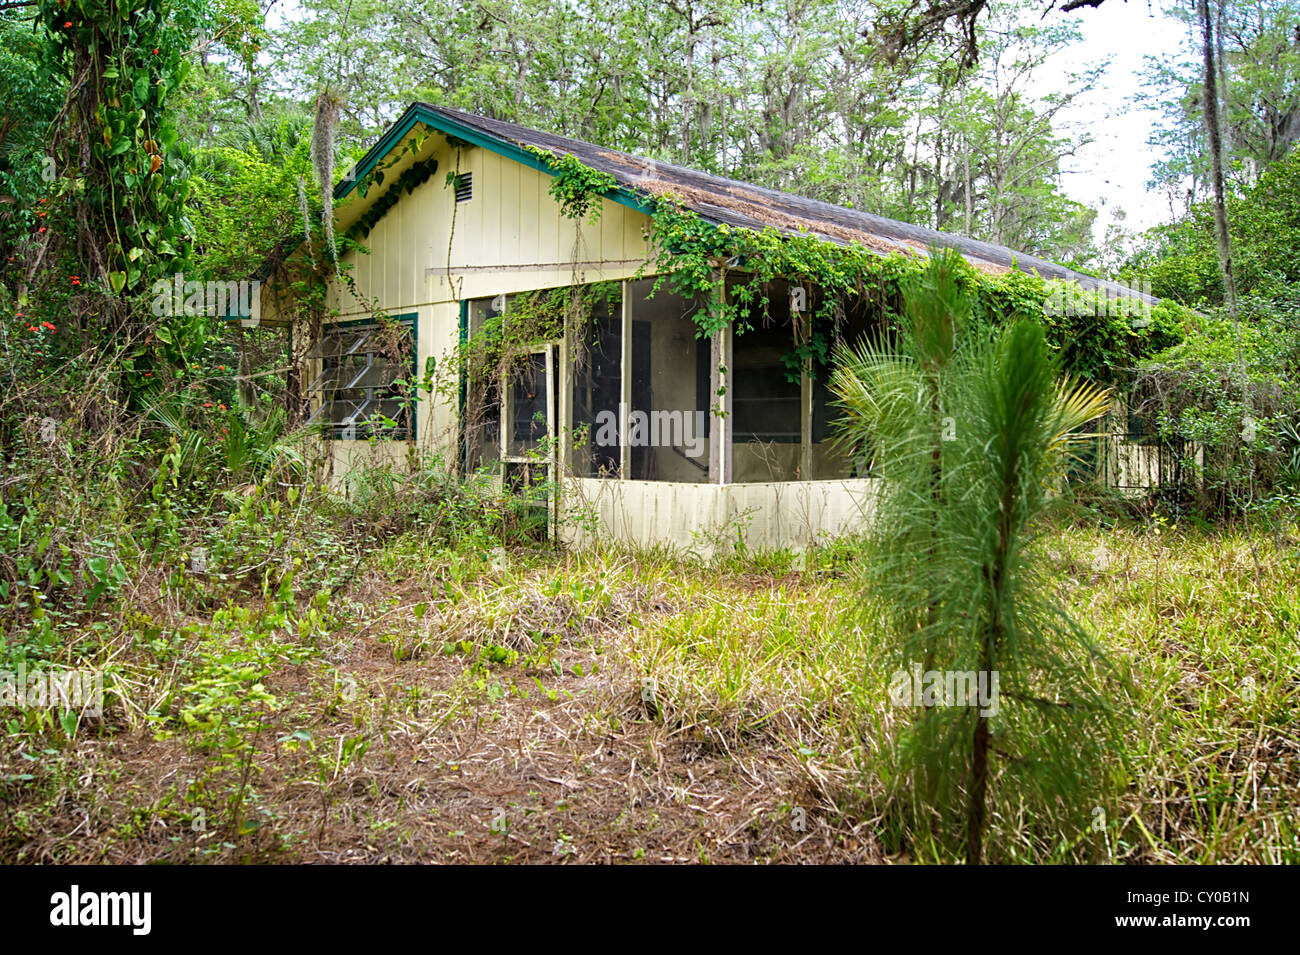 In the middle of an overgrown yard in south florida is an old abandoned yellow house. Stock Photo